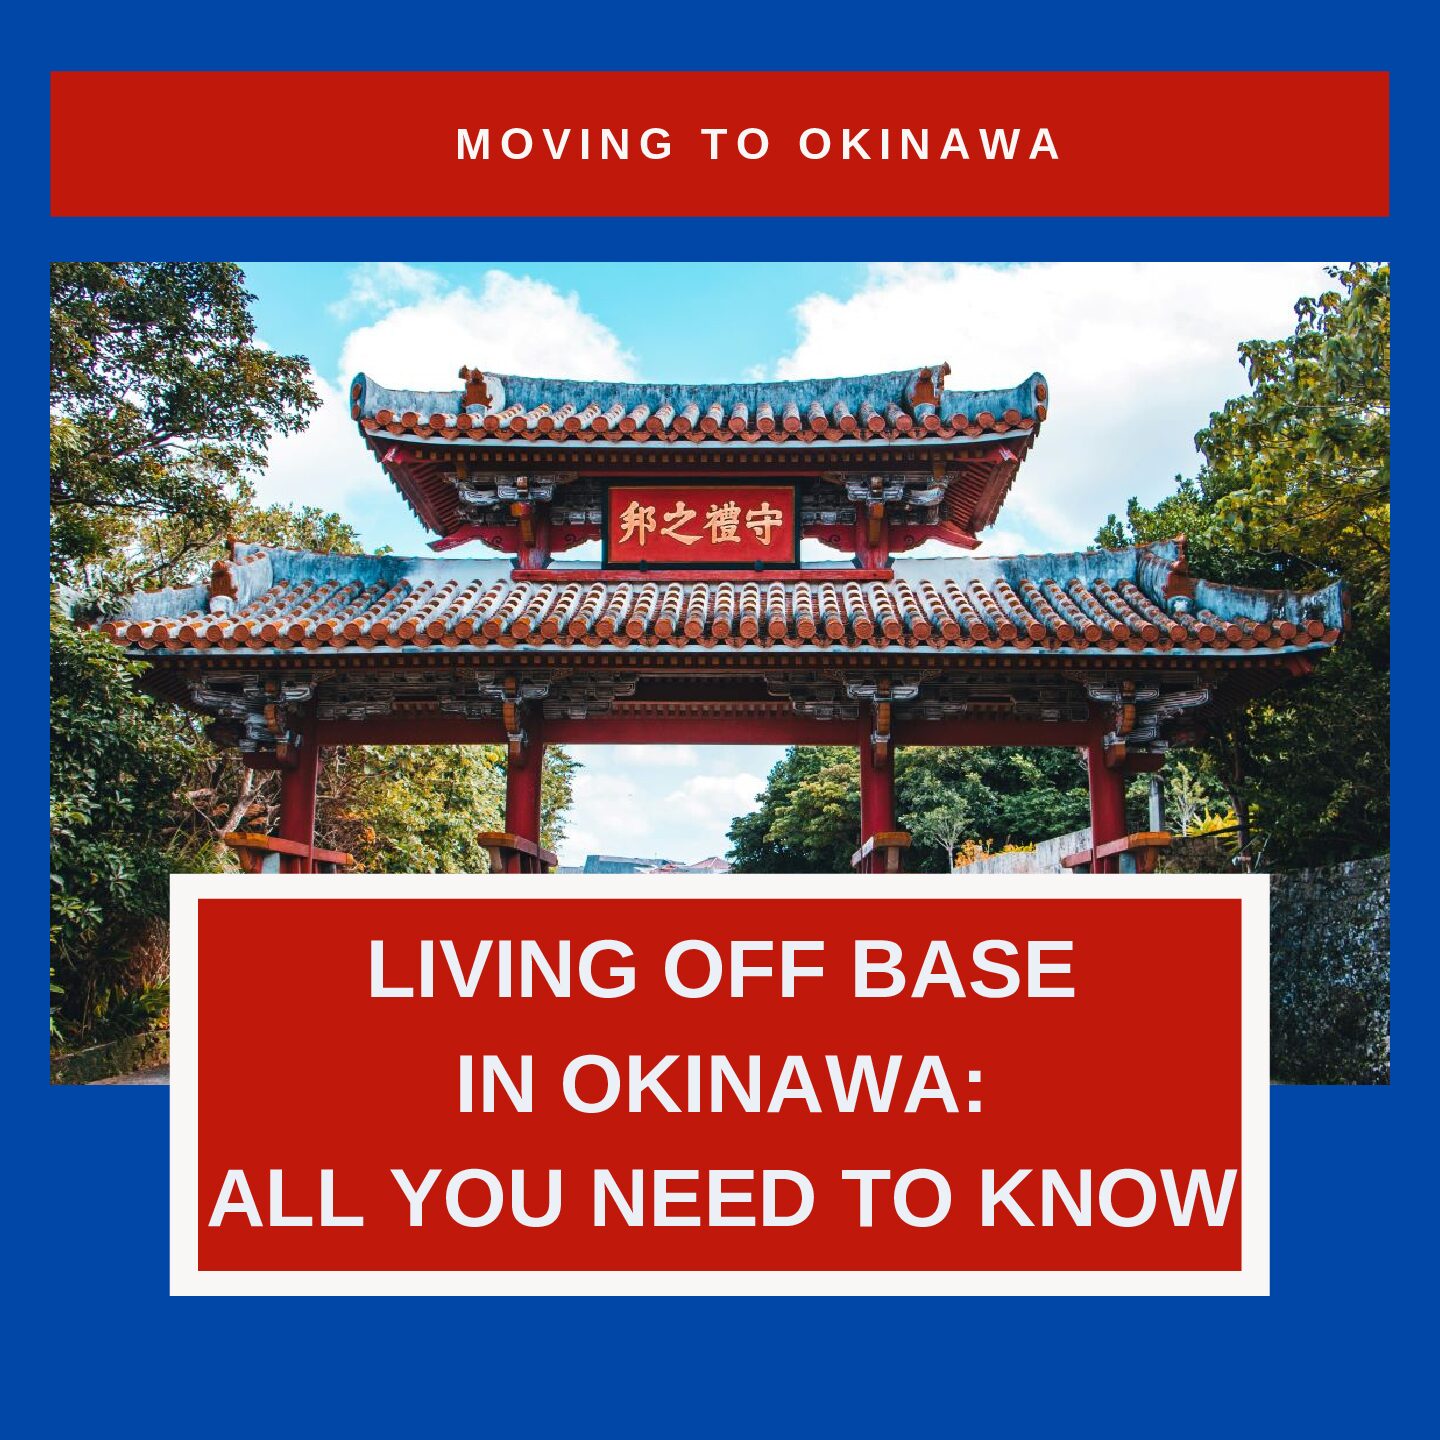 LIVING OFF BASE IN OKINAWA: All you need to know